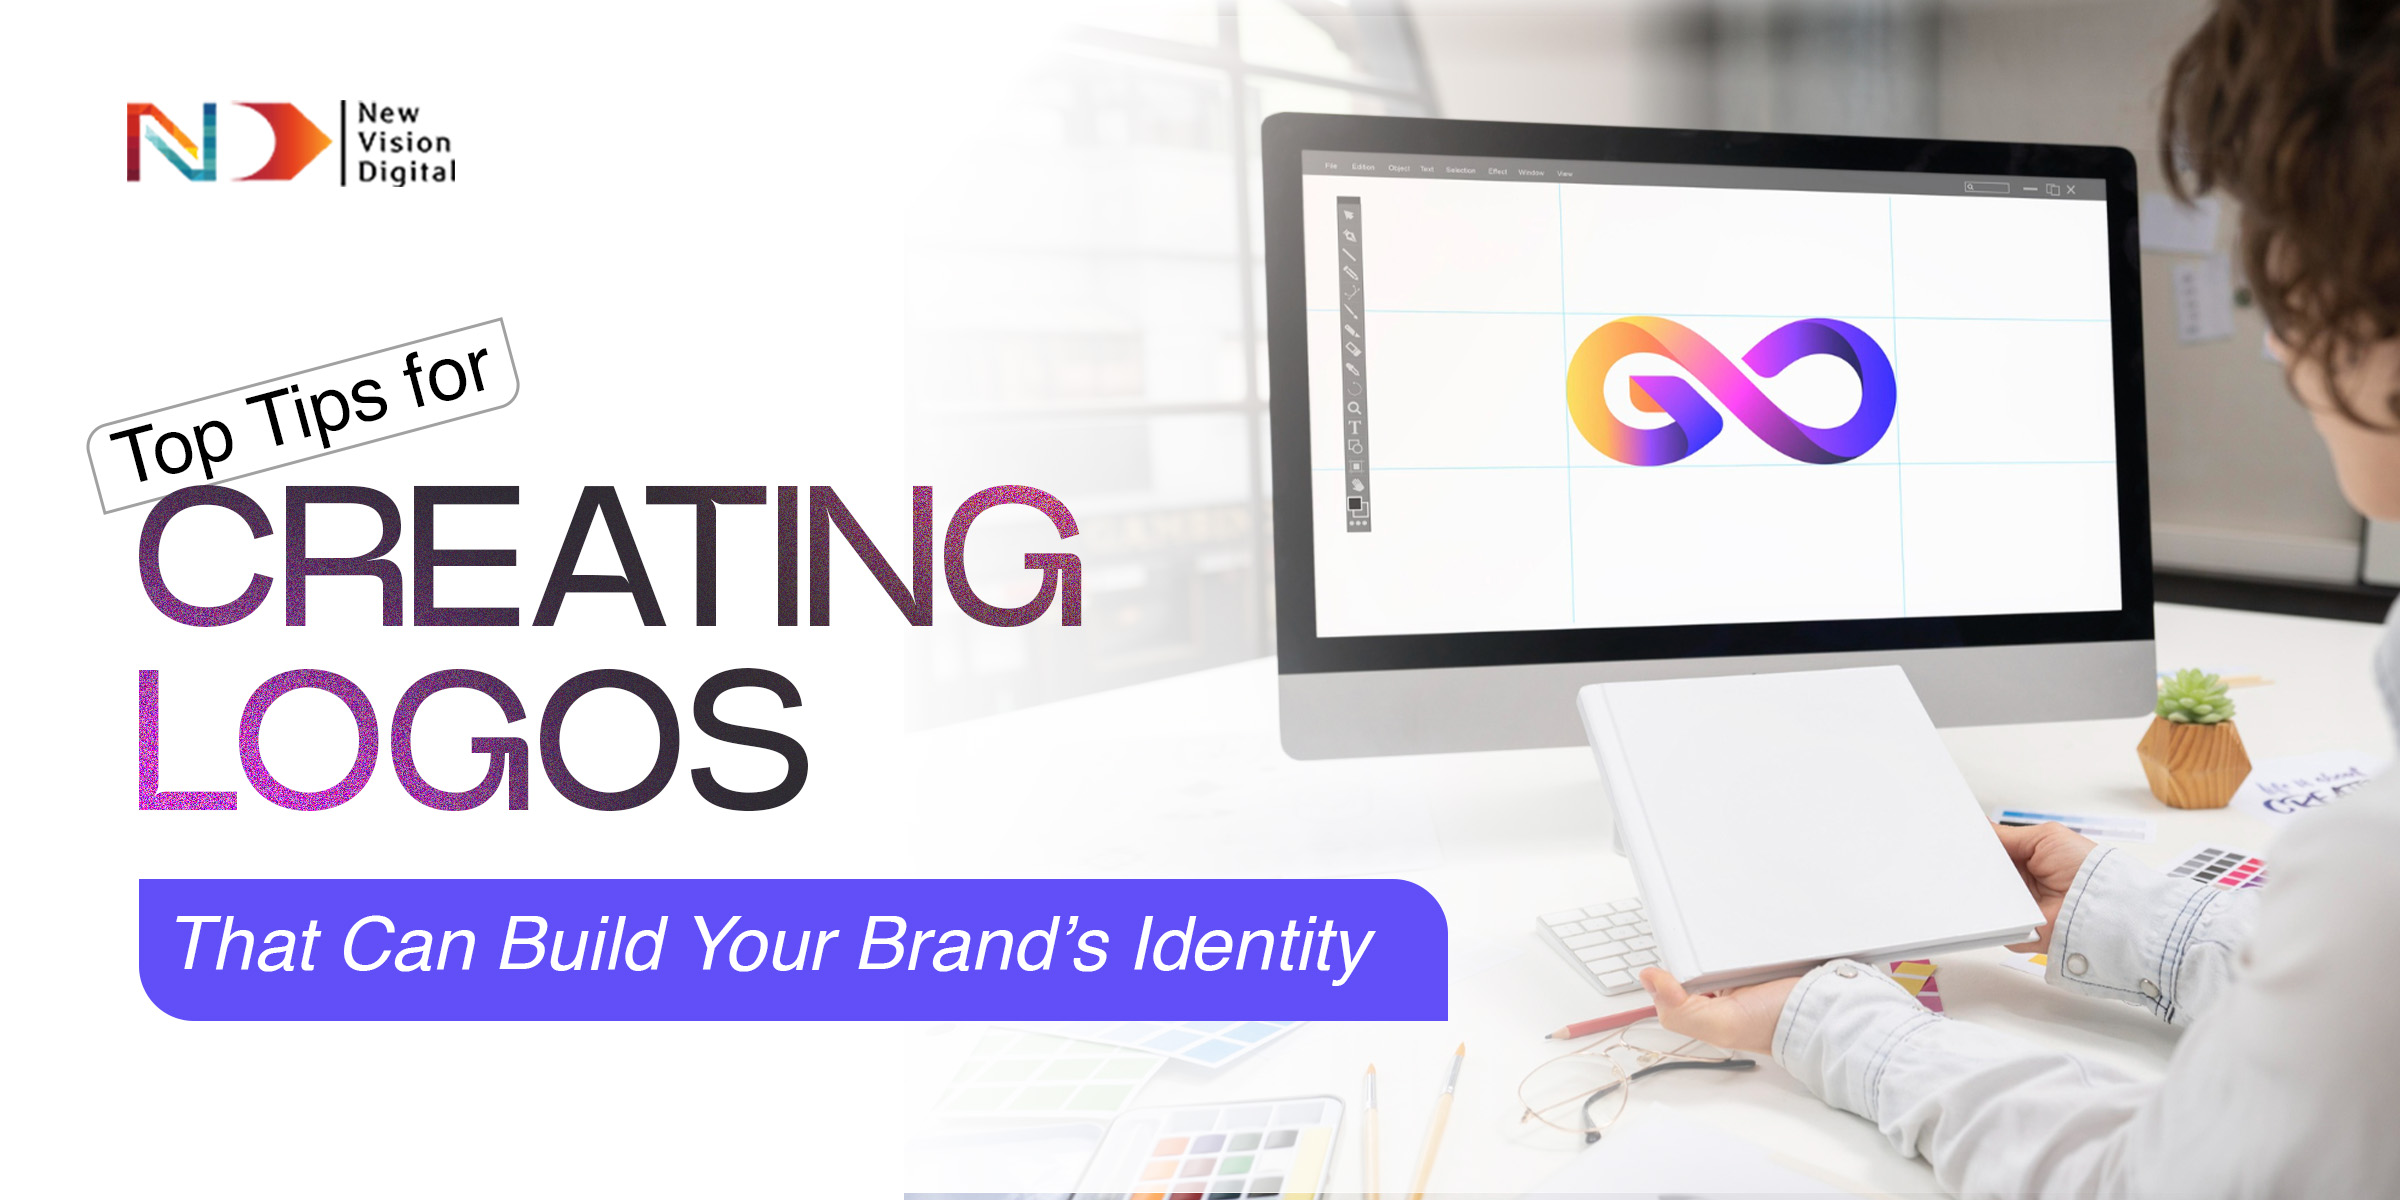 Top Tips for Creating Logos That Can Build Your Brand's Identity